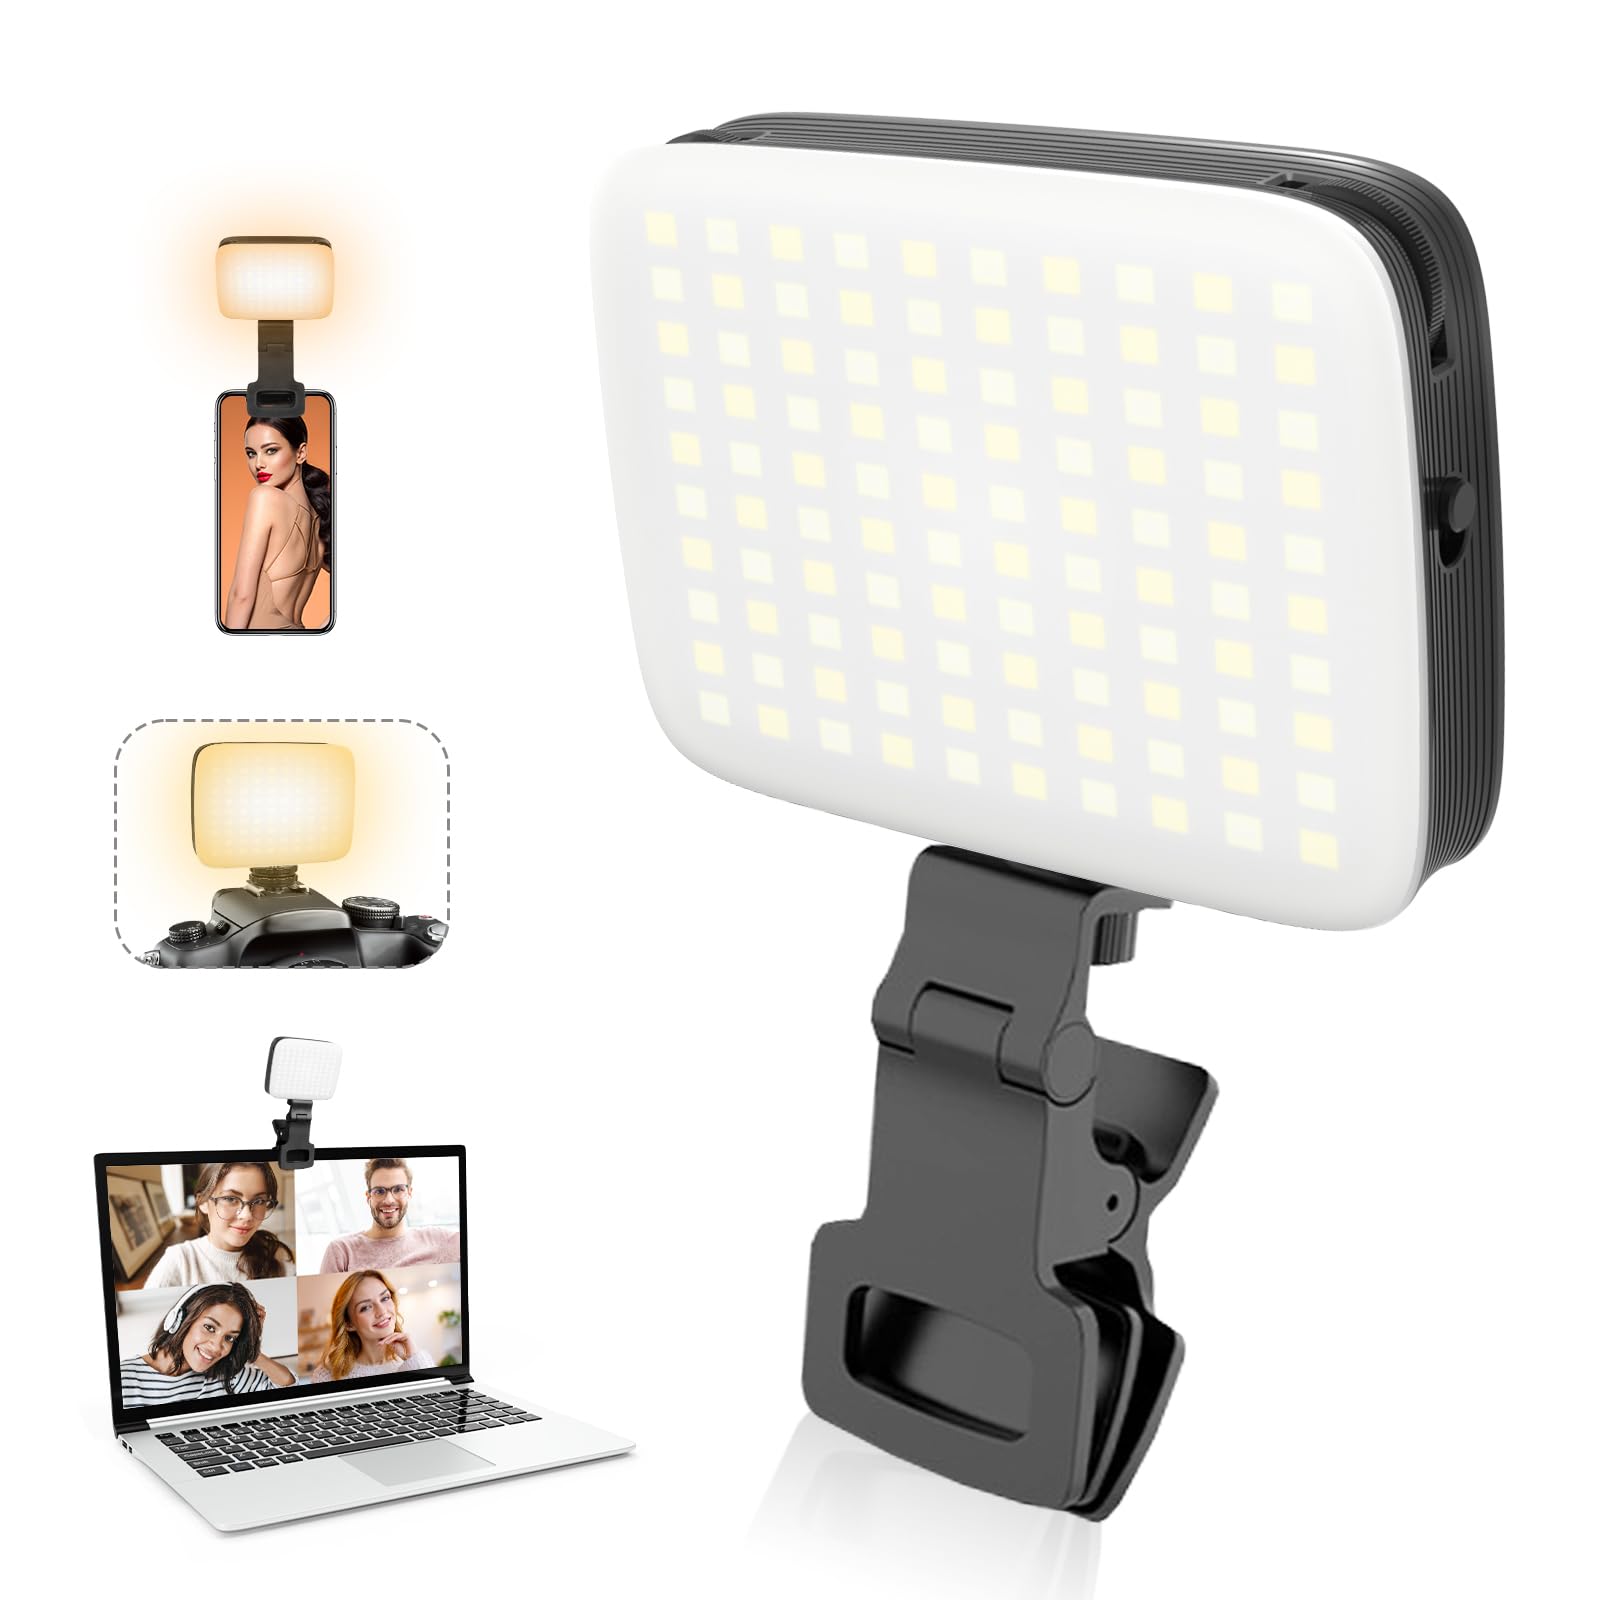 Eicaus 100 LED Rechargeable Selfie Phone Light with Hot Shoe Mount Adapter and Clip,Camera Fill Light for Pictures,Video iPhone Light for Video Conferencing, Portable Light for influencers, Tiktok